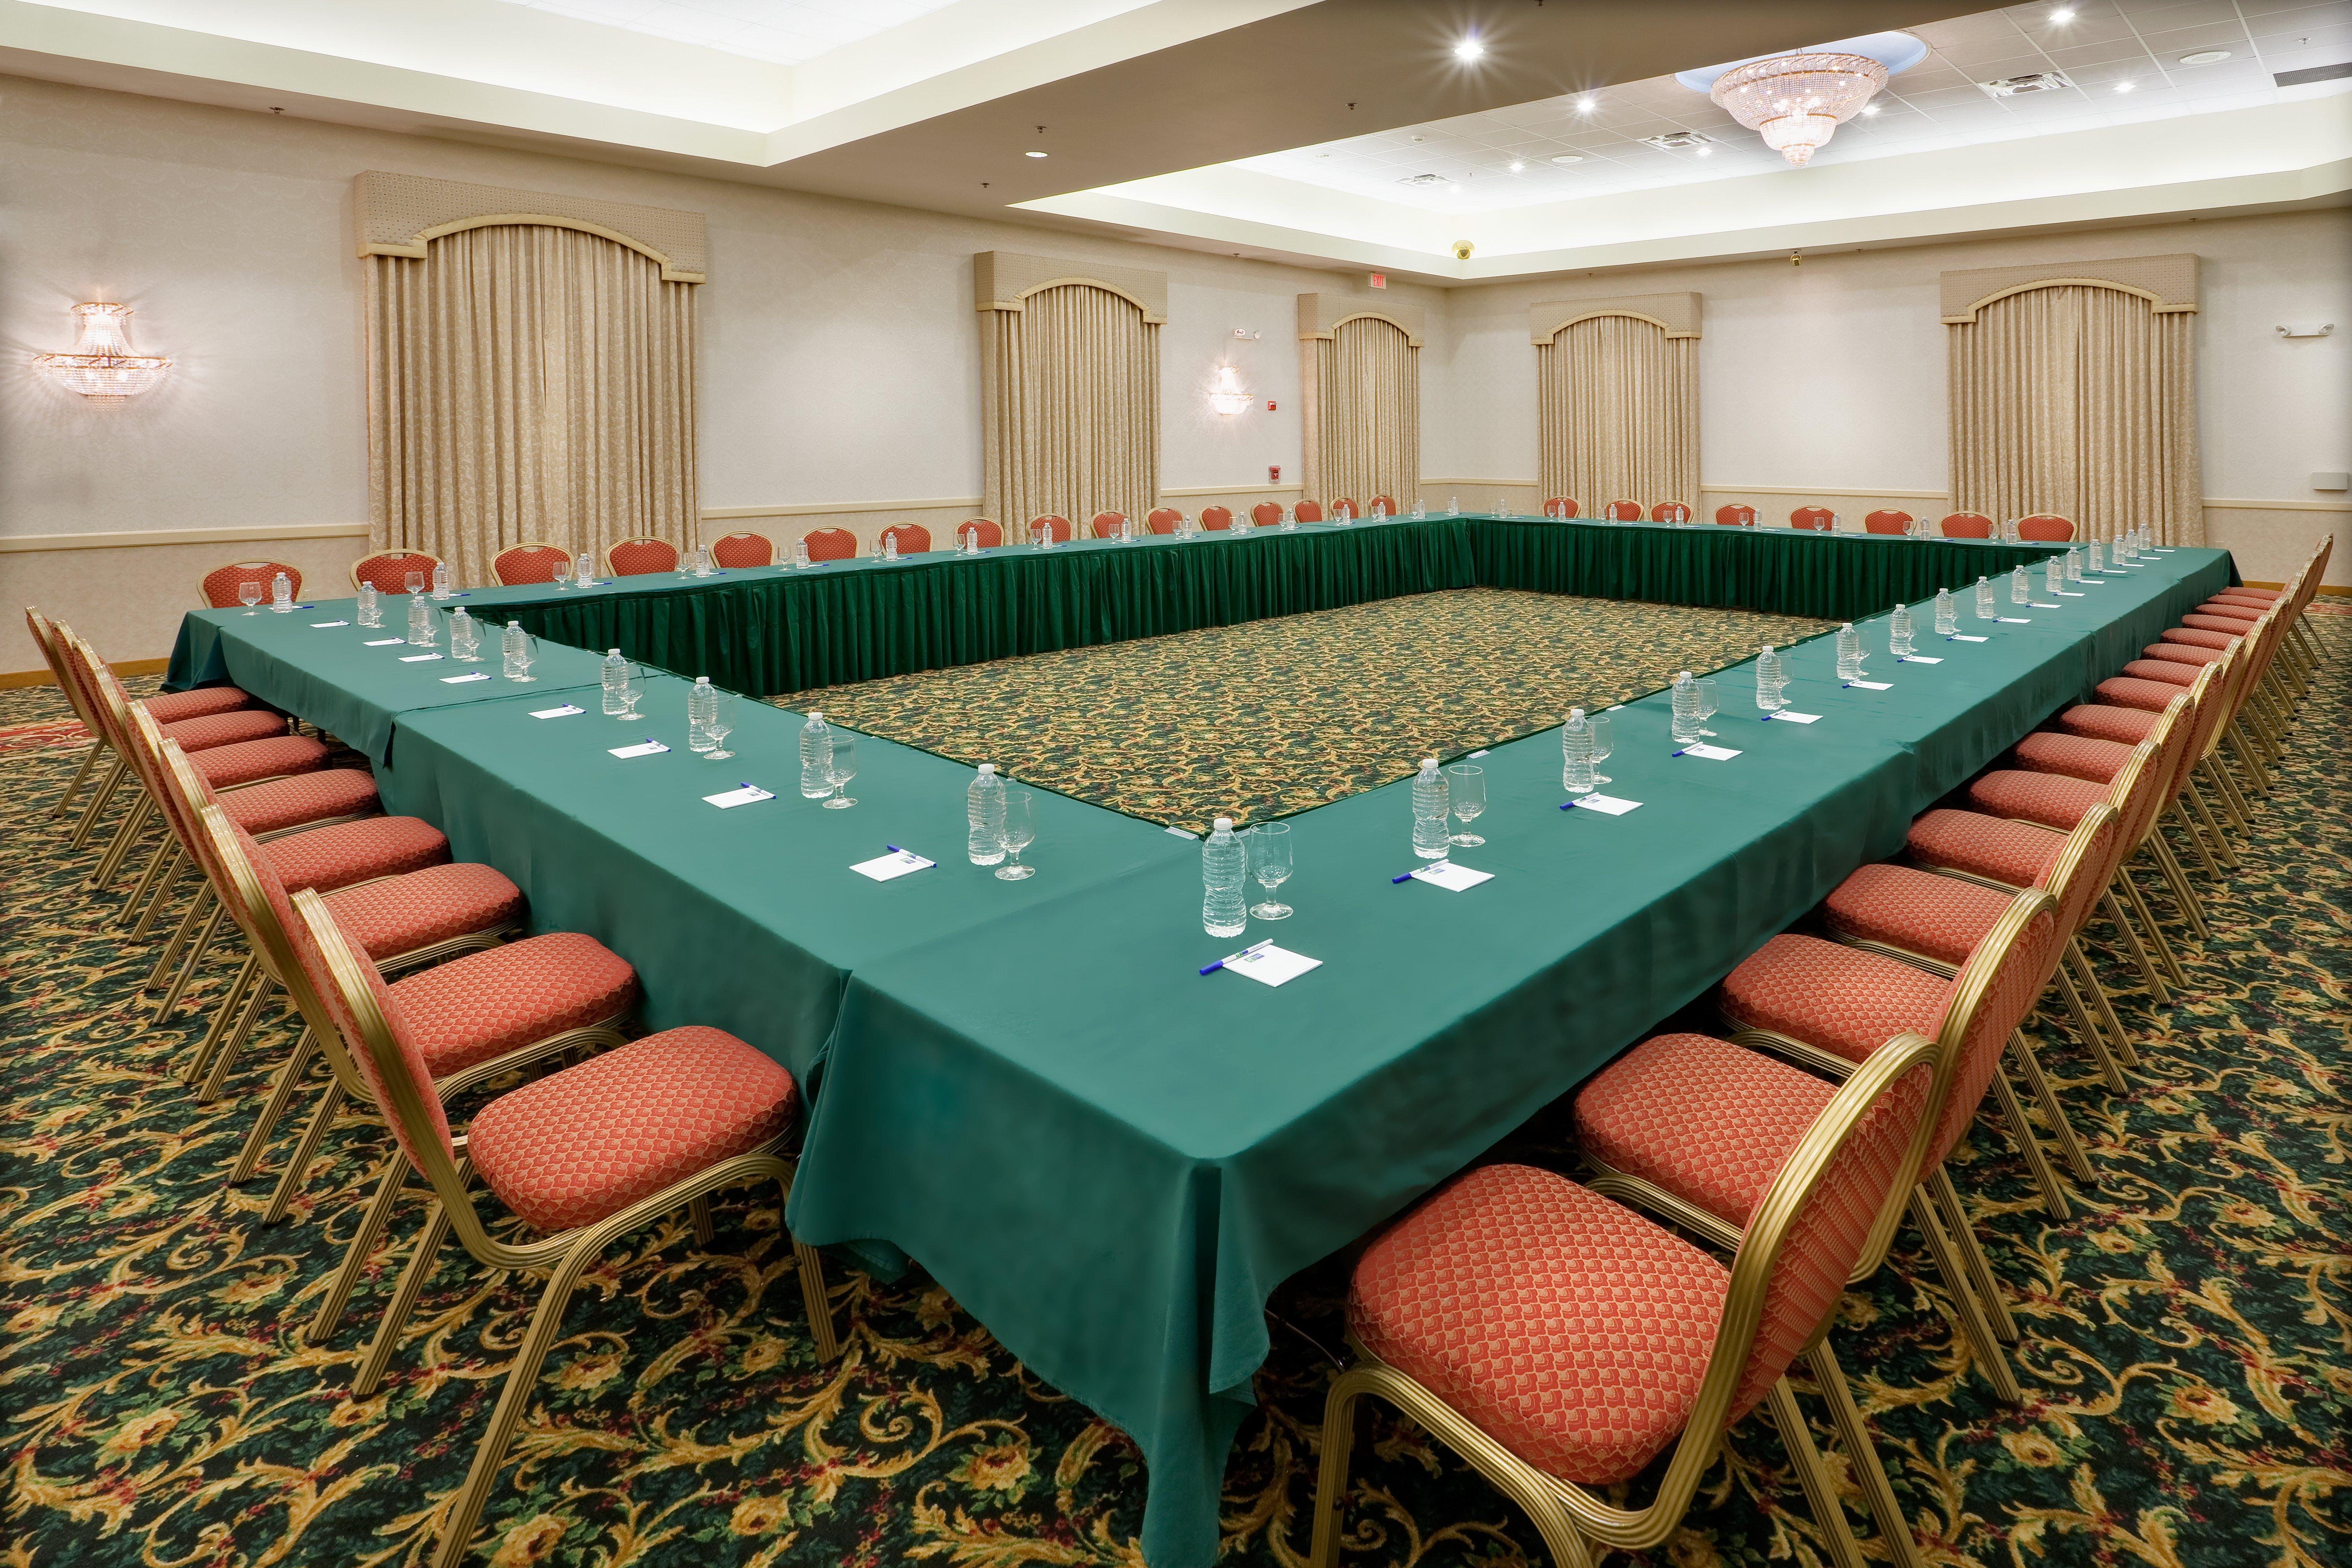 Right spacious room for your next business conference